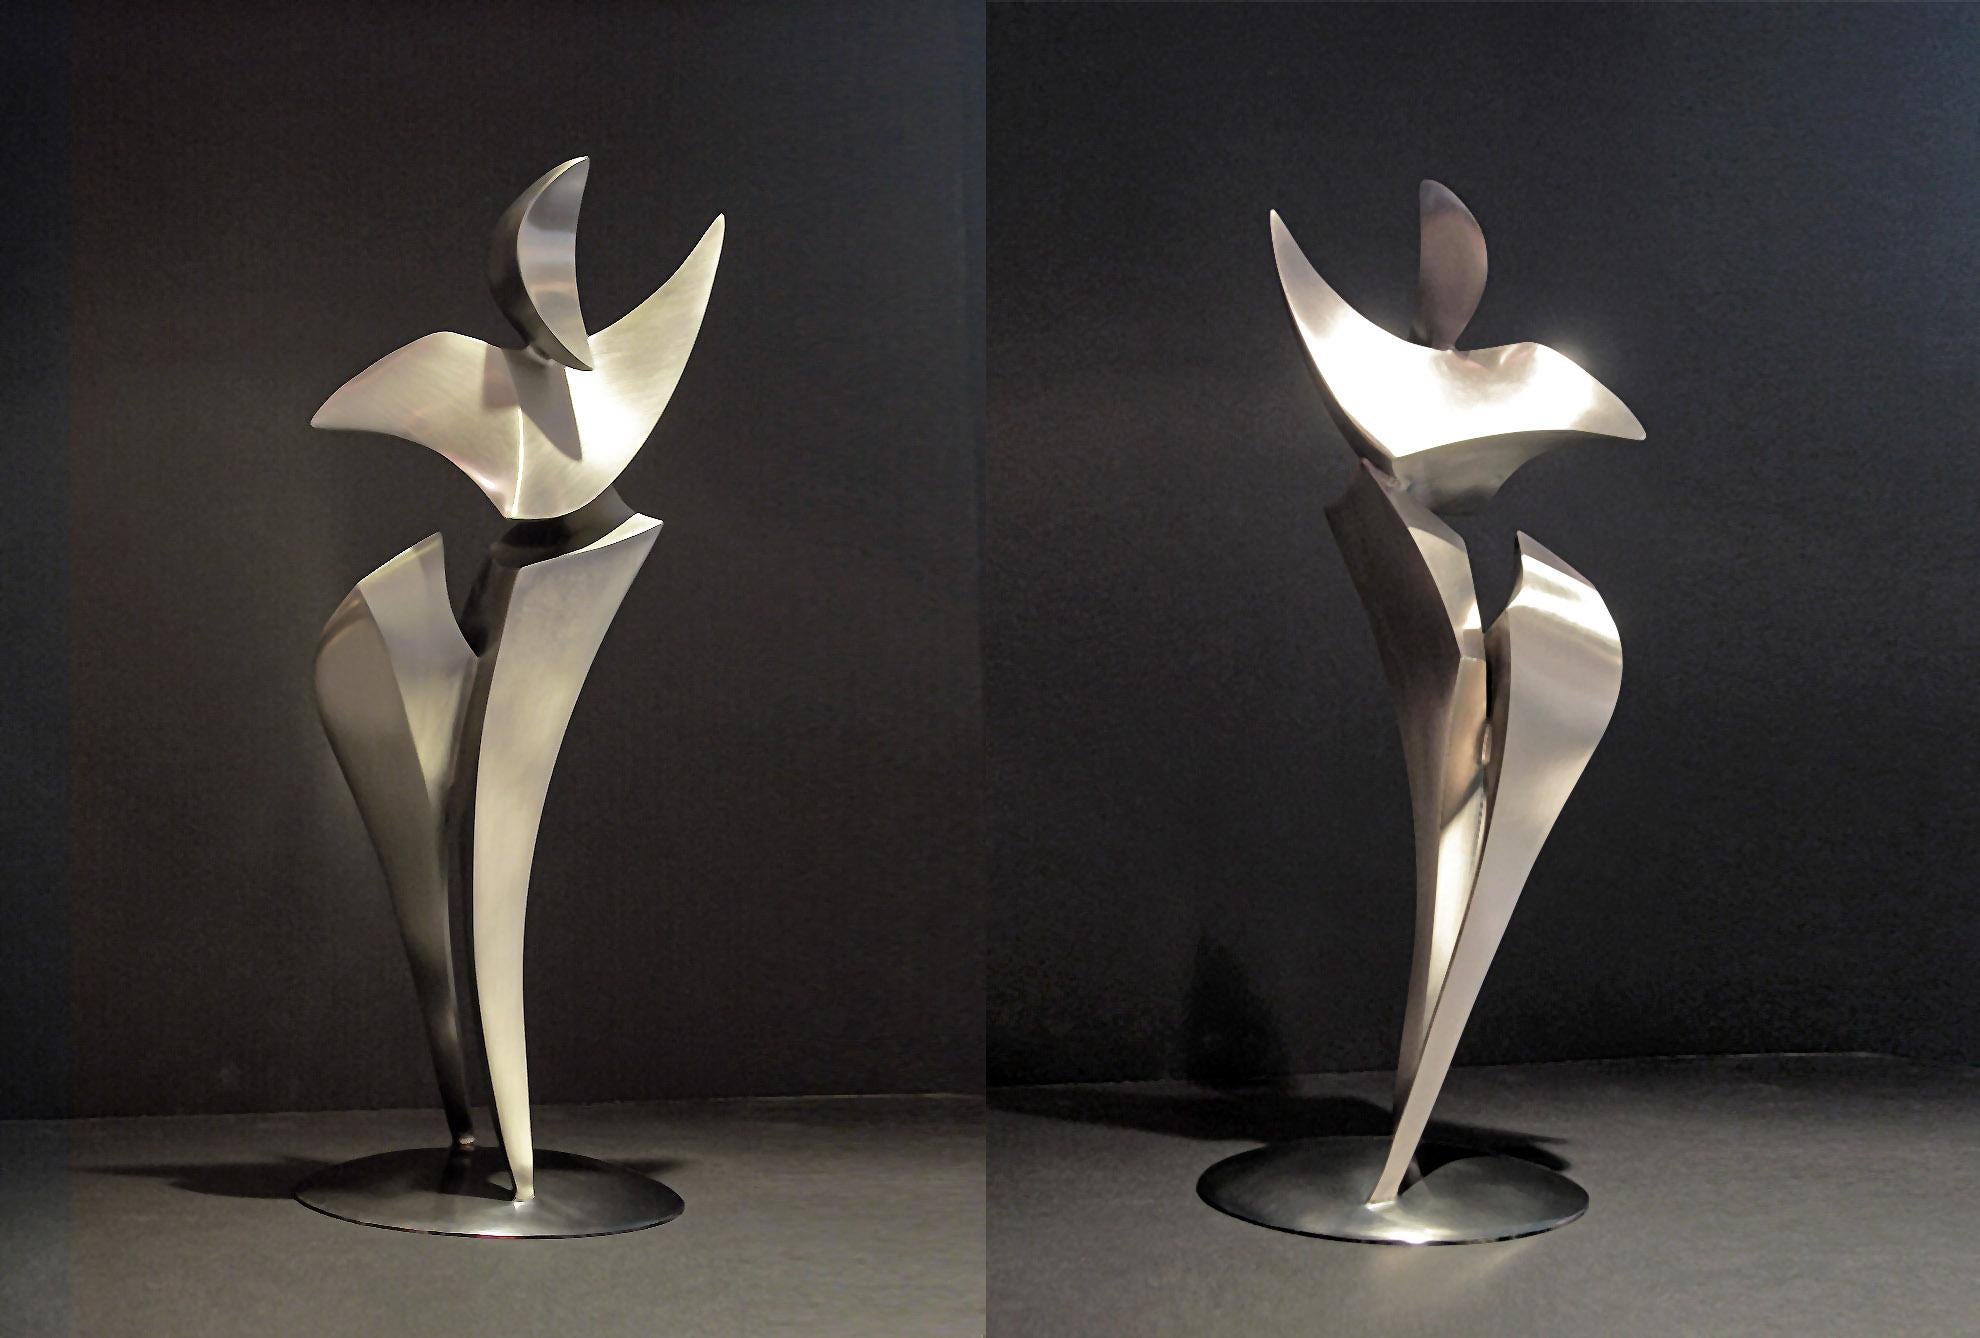 ORACLE 11 - Abstract Sculpture by Lyle London